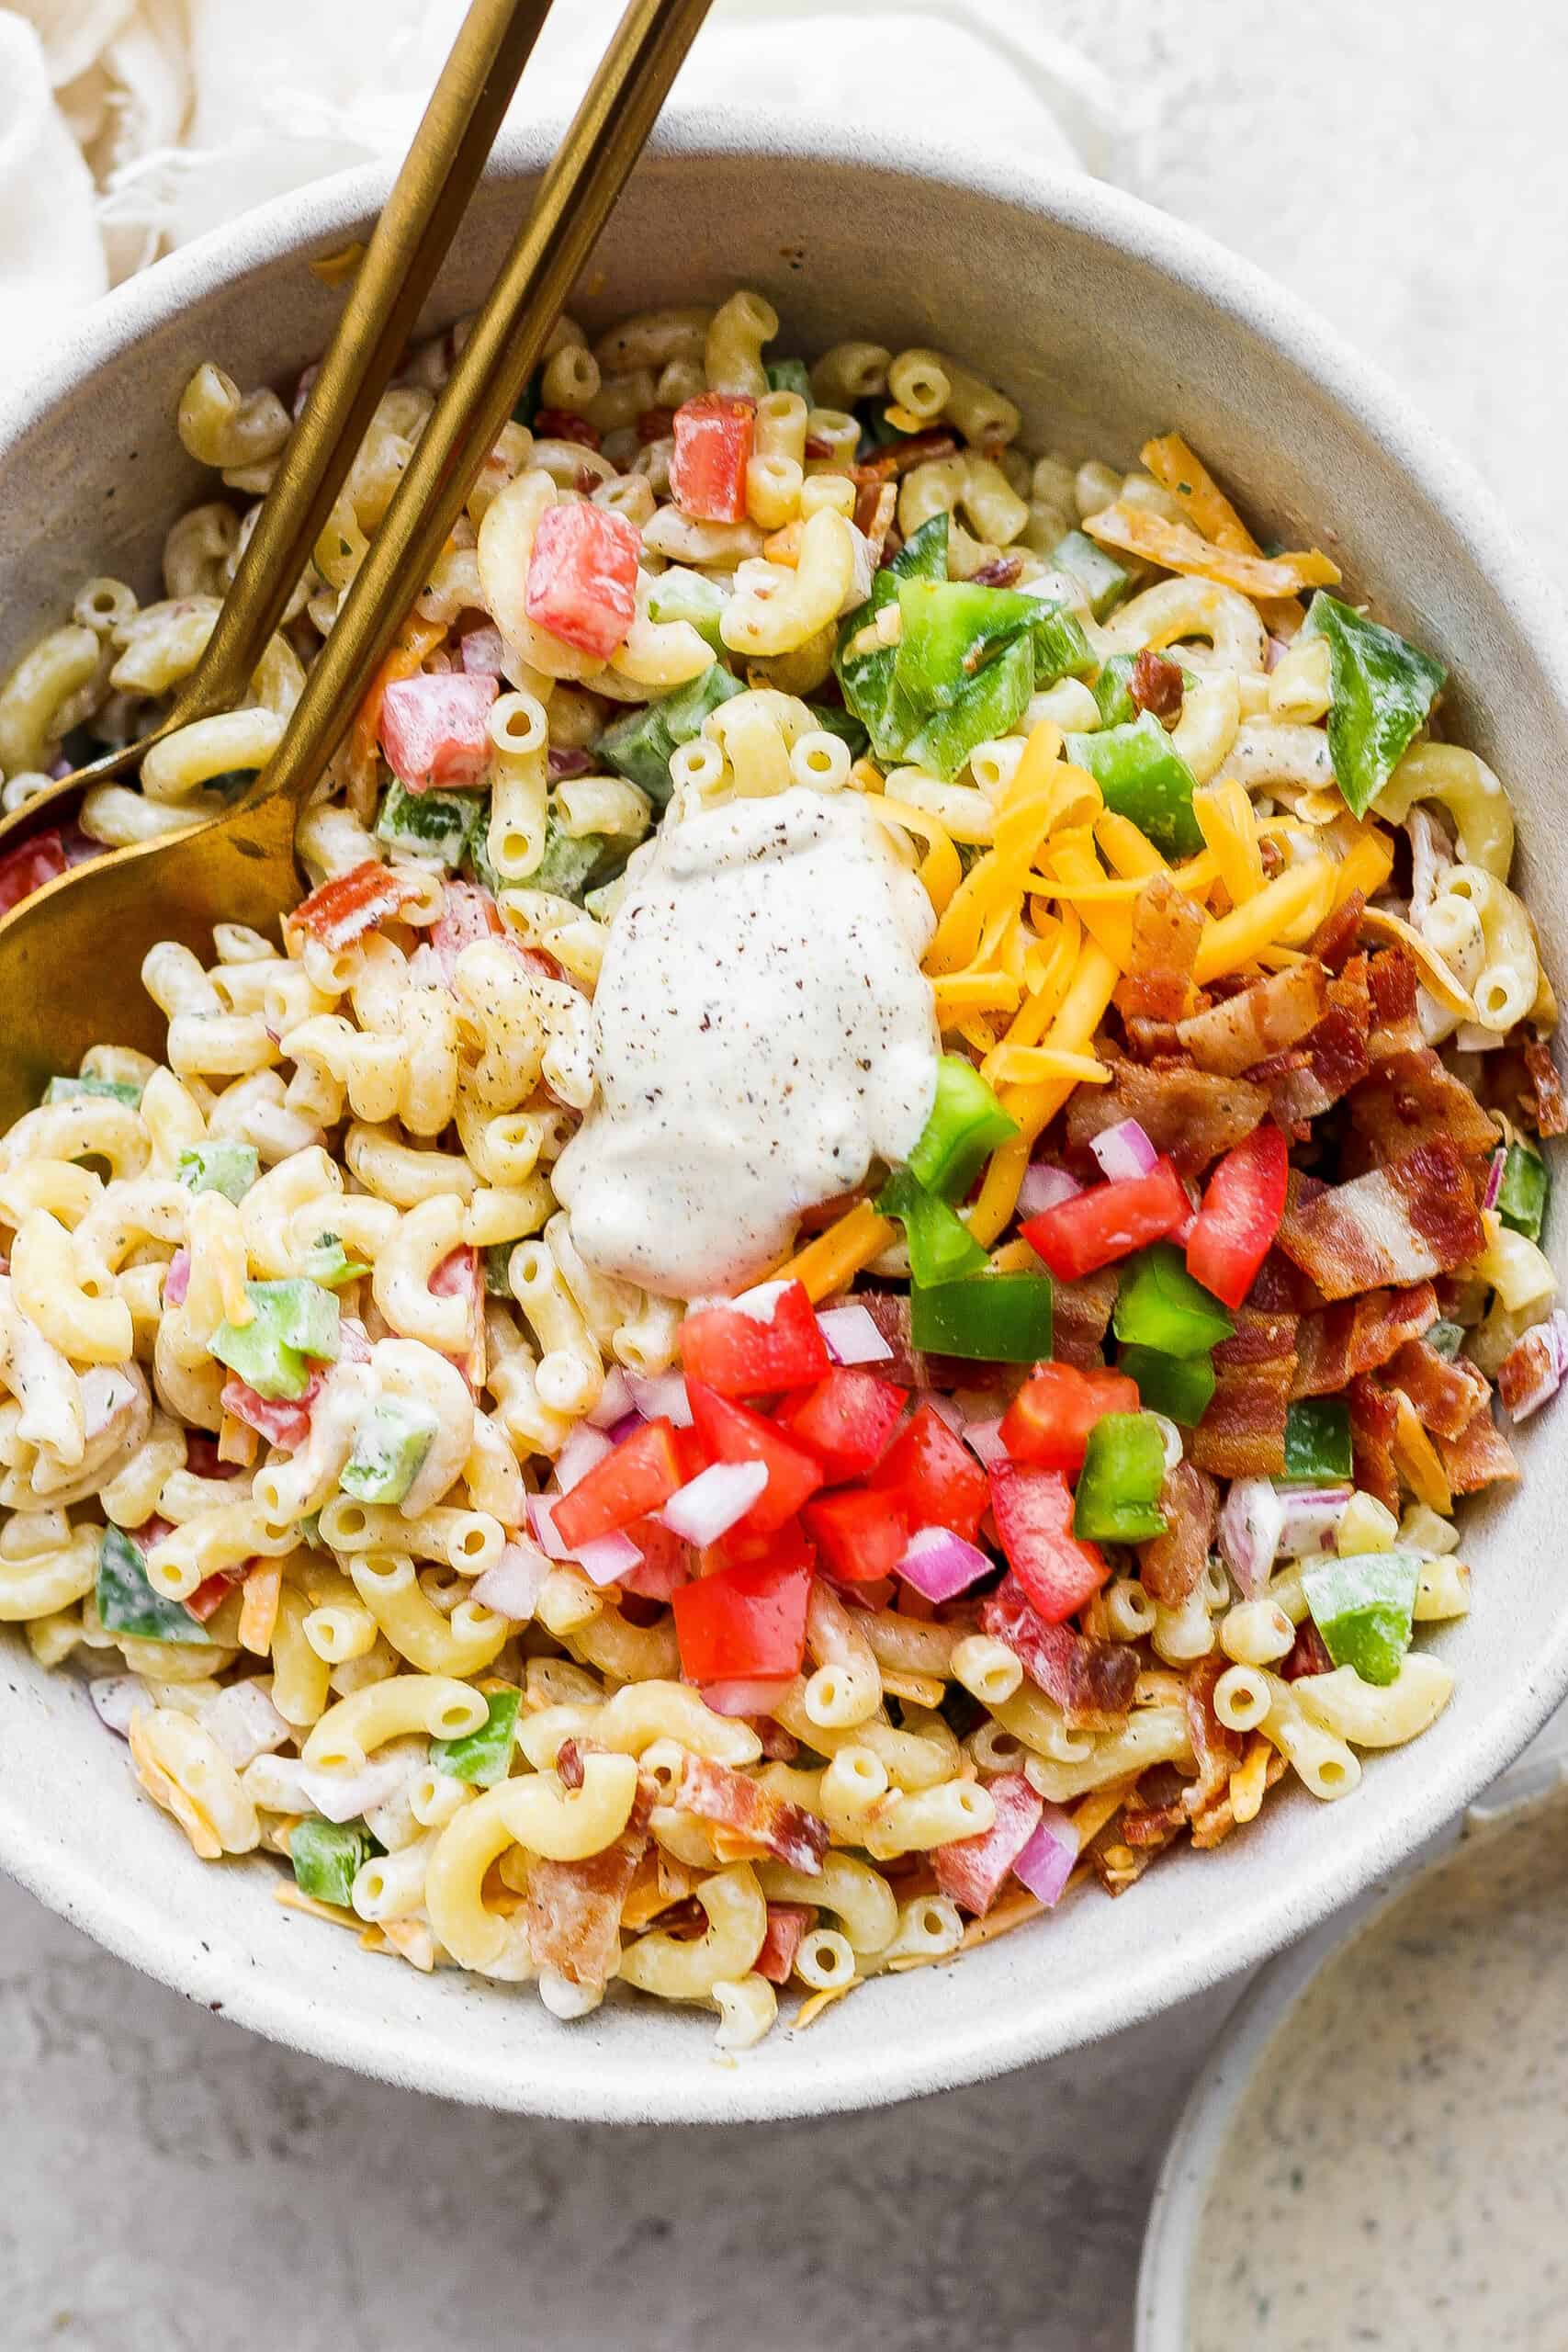 Mixing vegetables and macaroni together in a bowl.